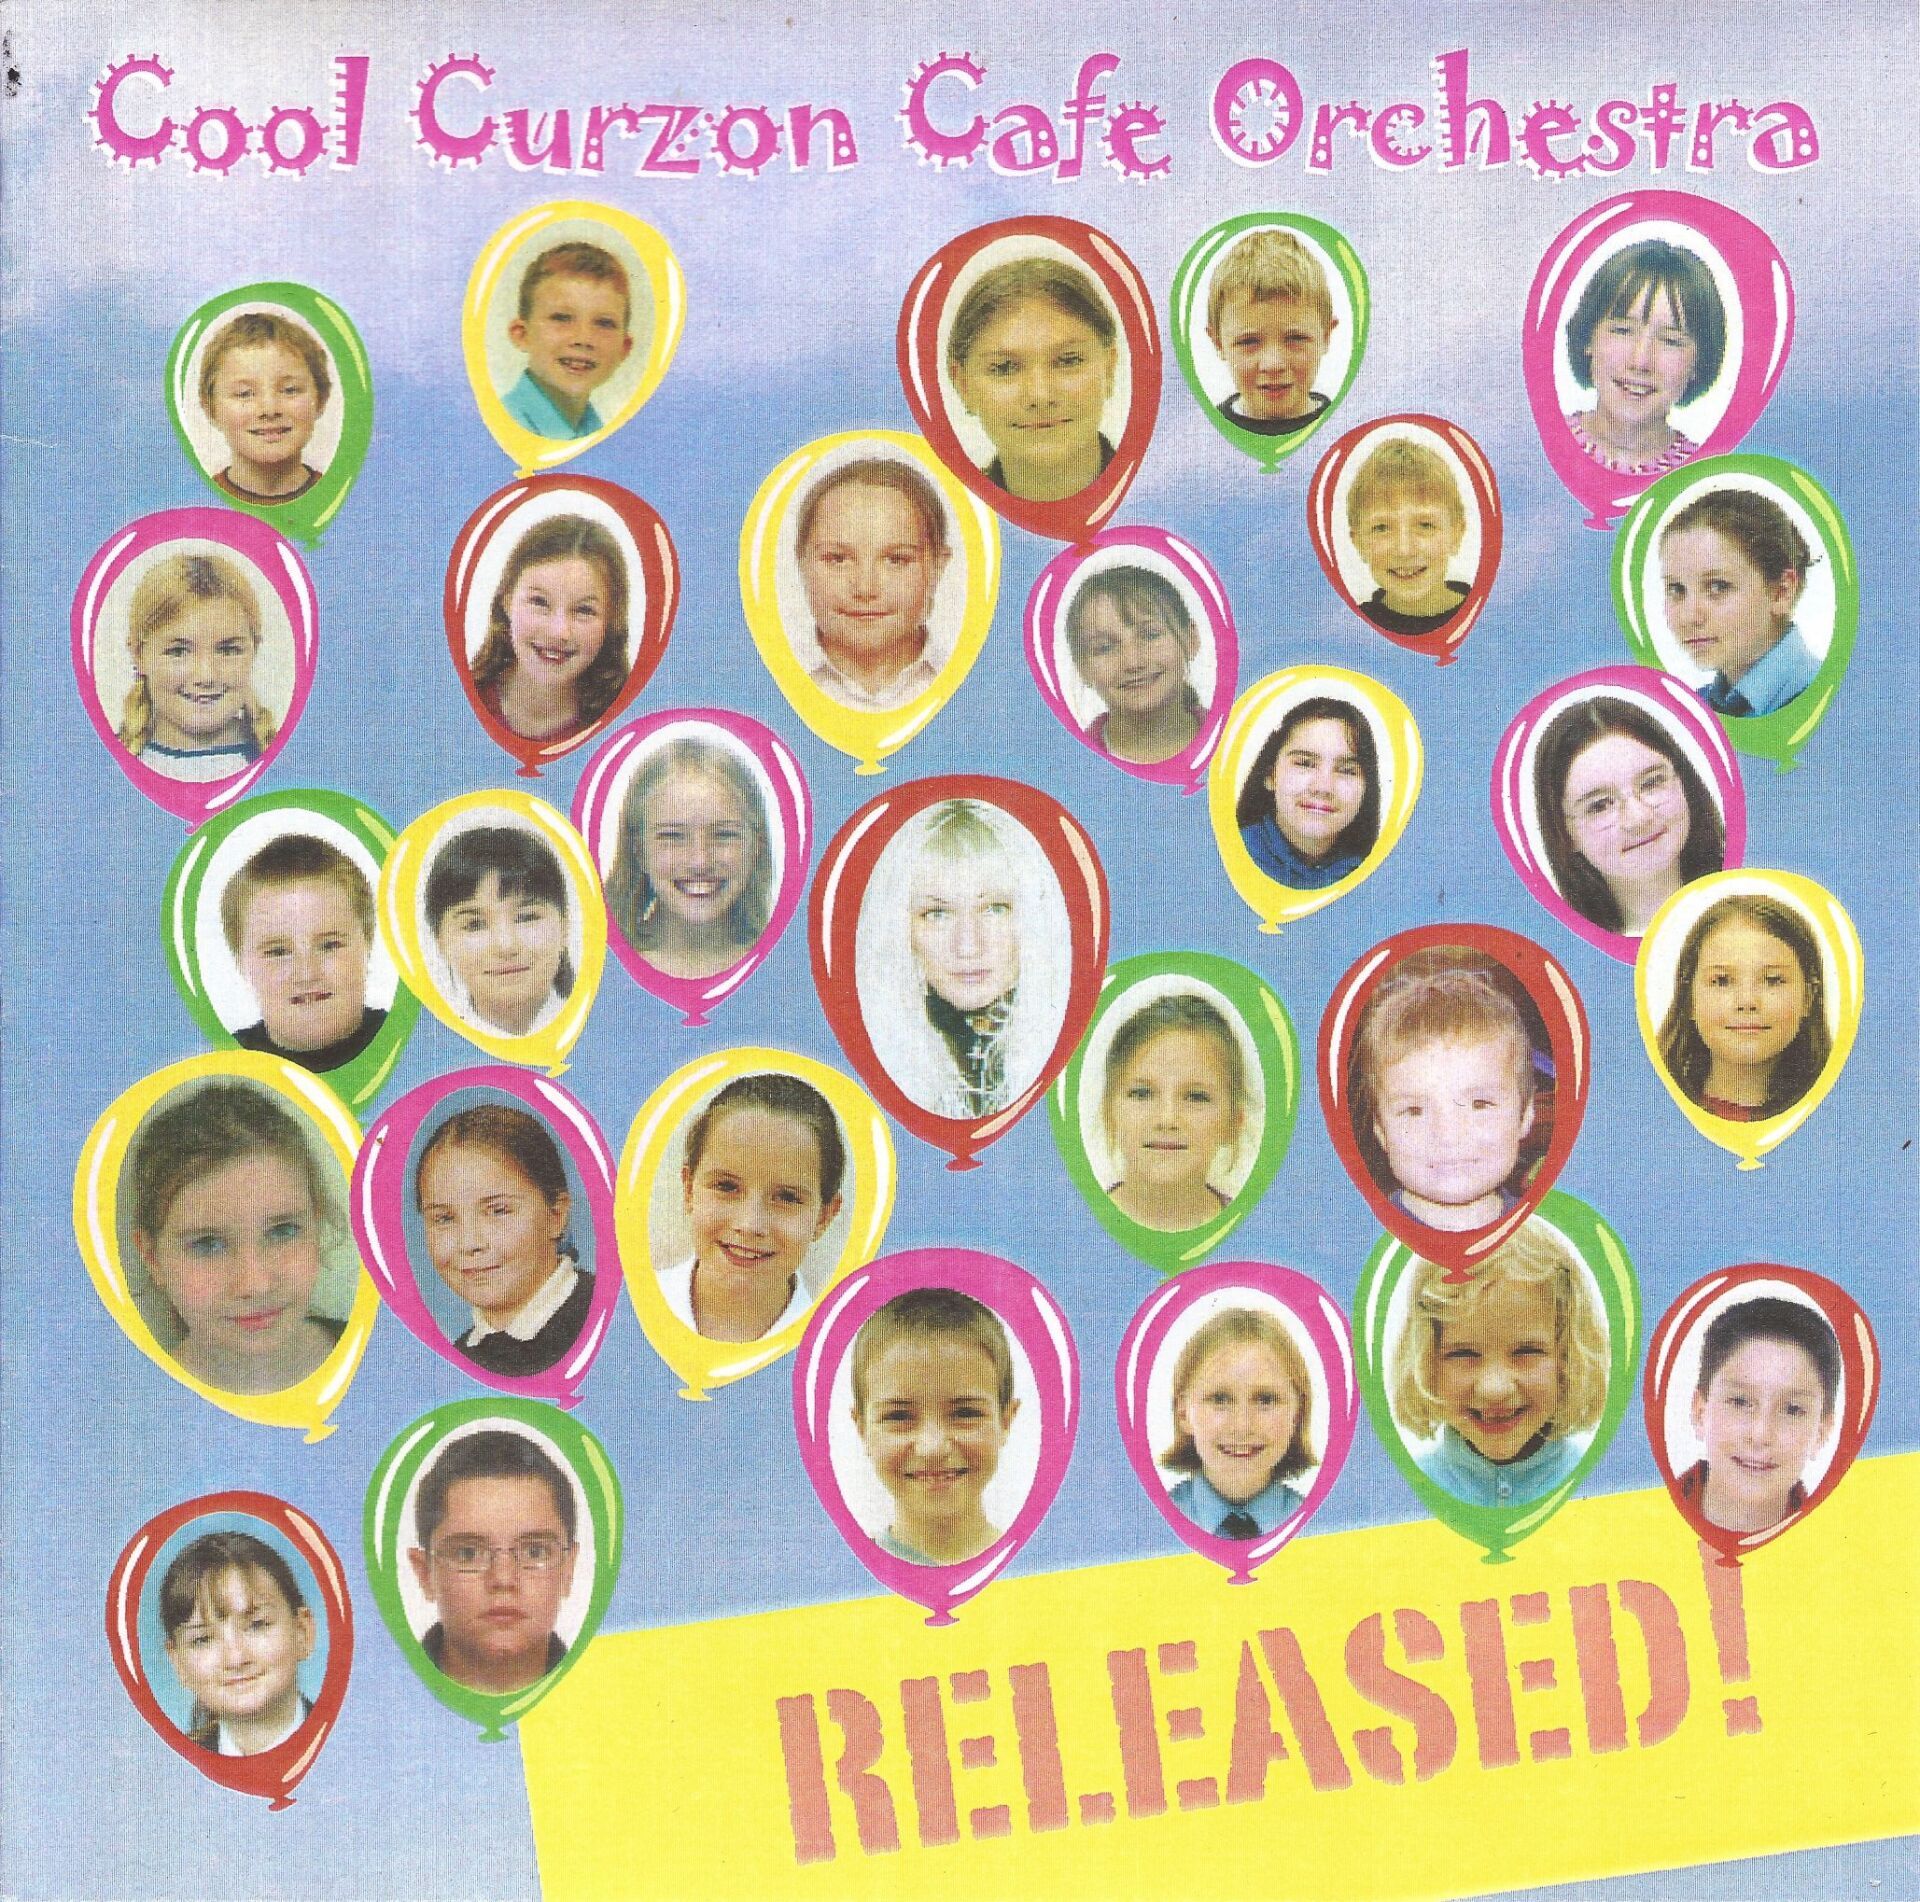 Released  : Debbie Curtis & The Cool Curzon Cafe Orchestra